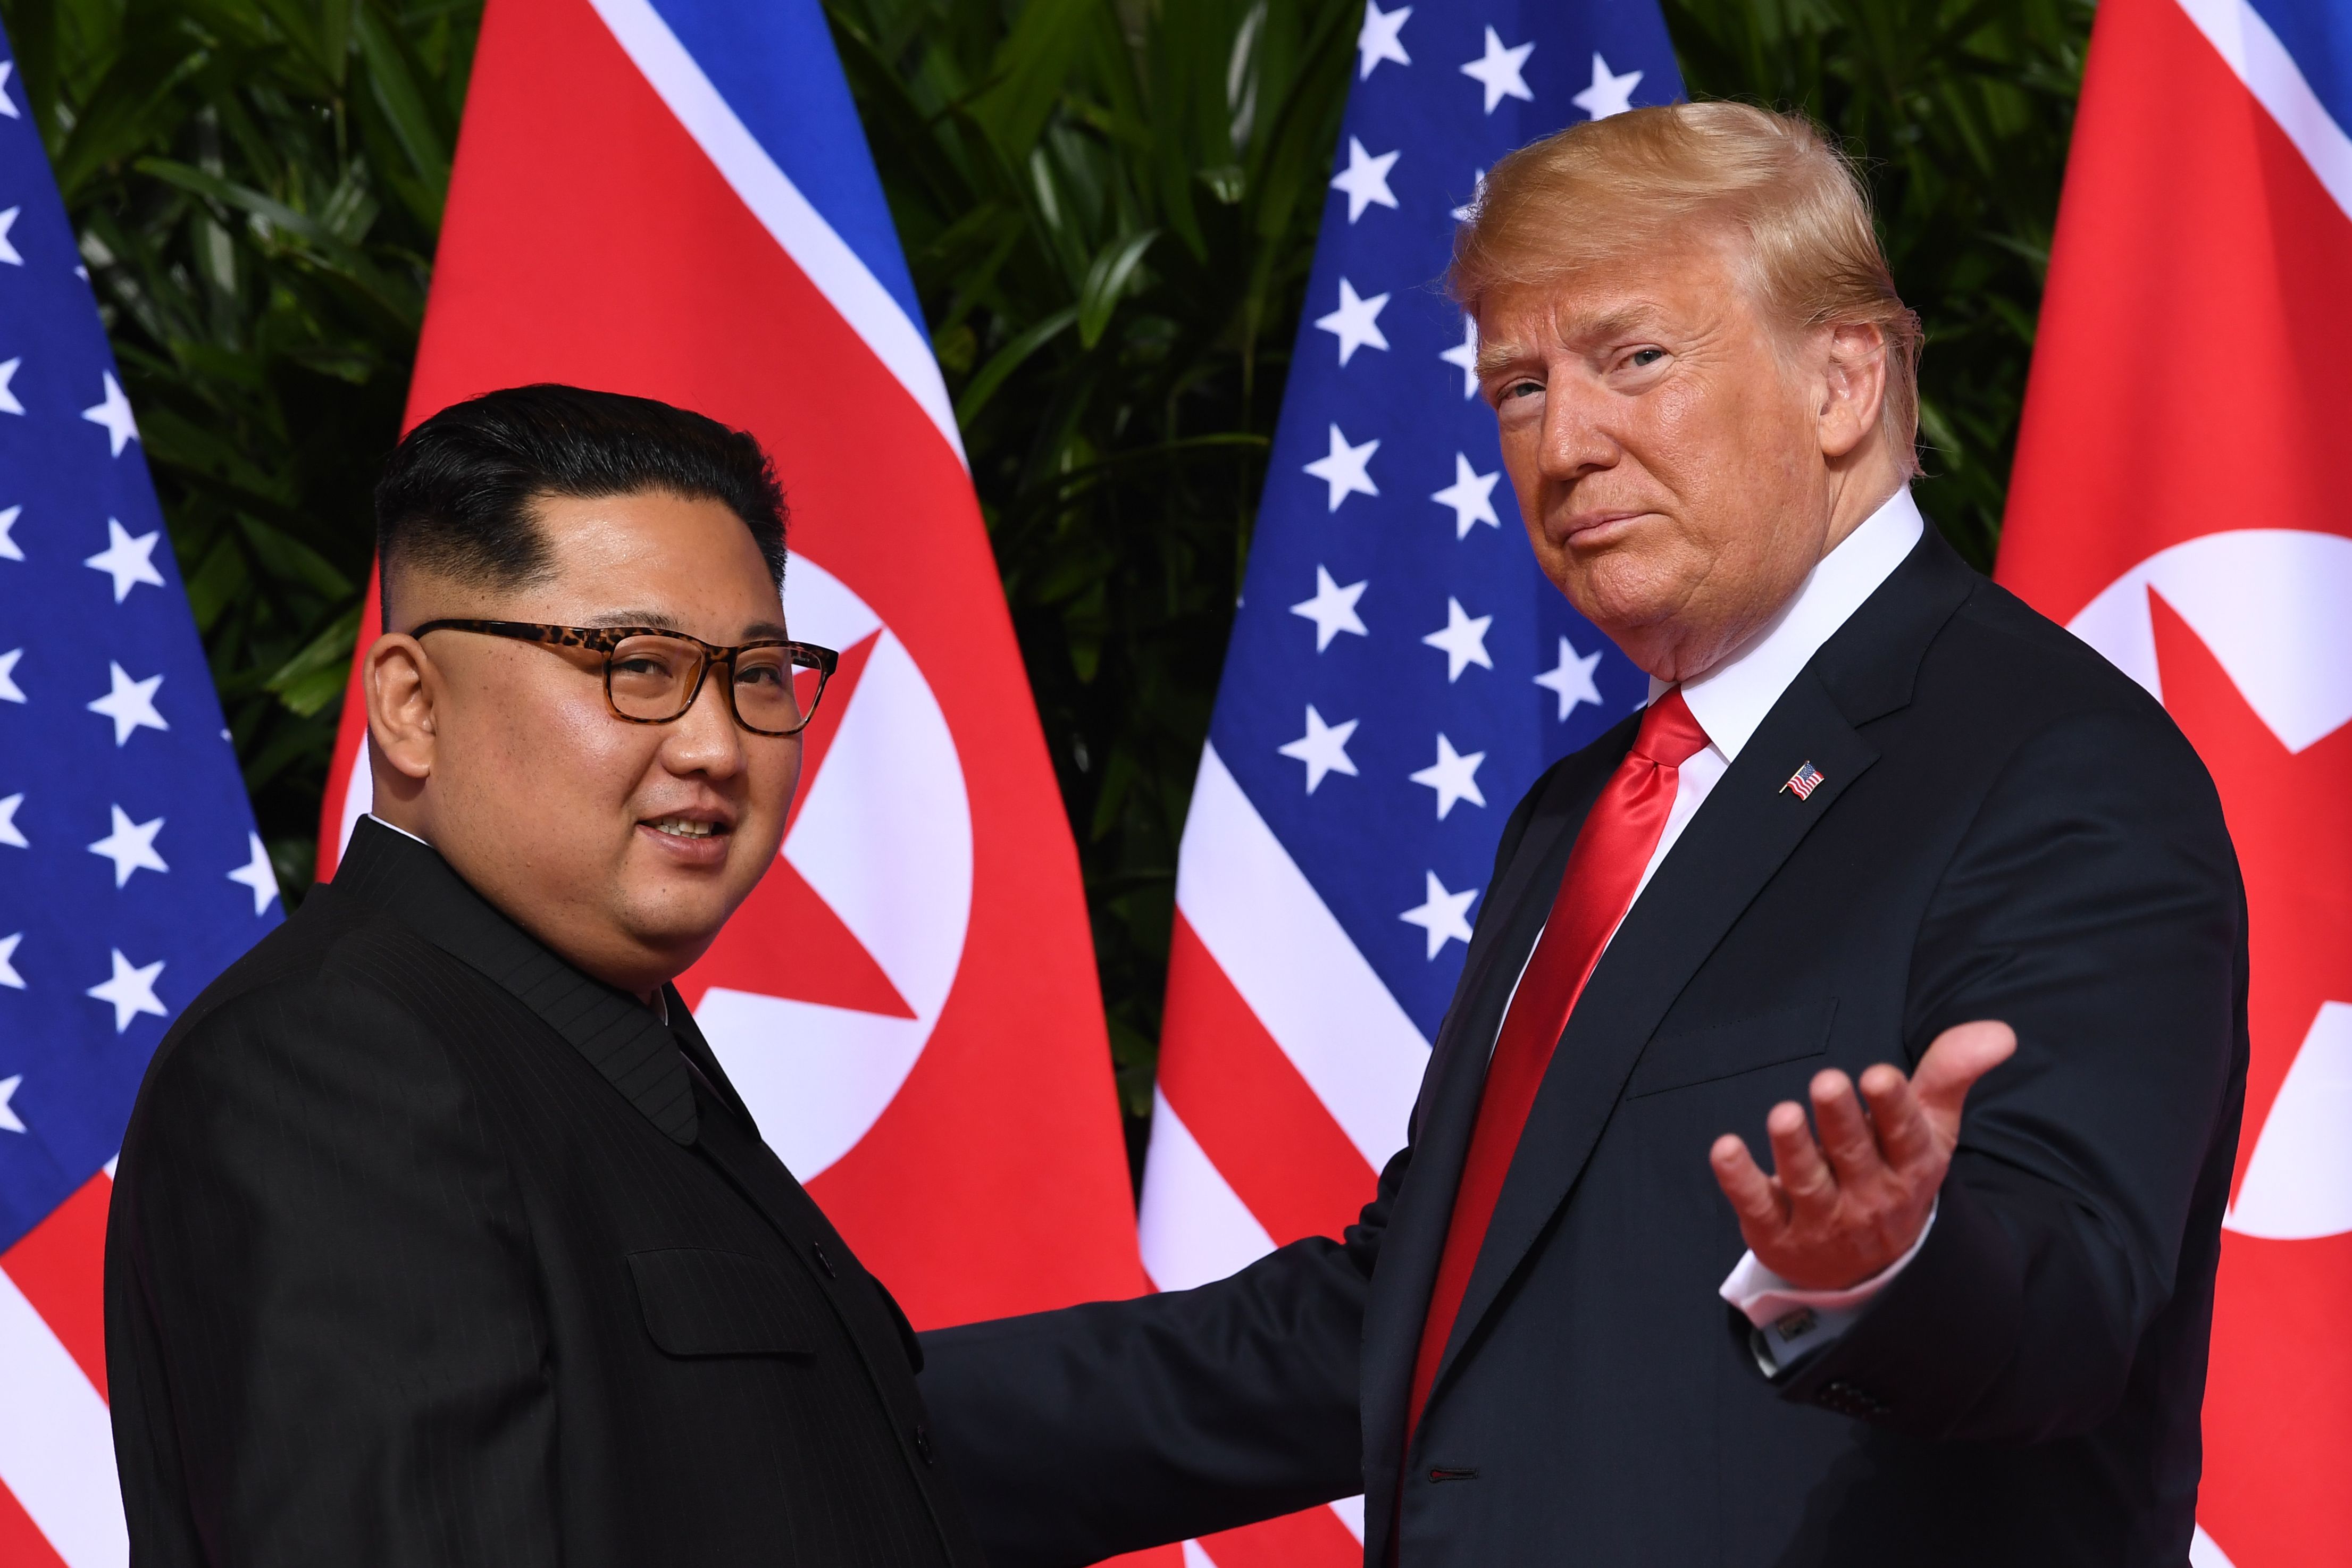 President Donald Trump meets with North Korea’s leader Kim Jong Un at the start of their summit in Singapore on June 12, 2018.